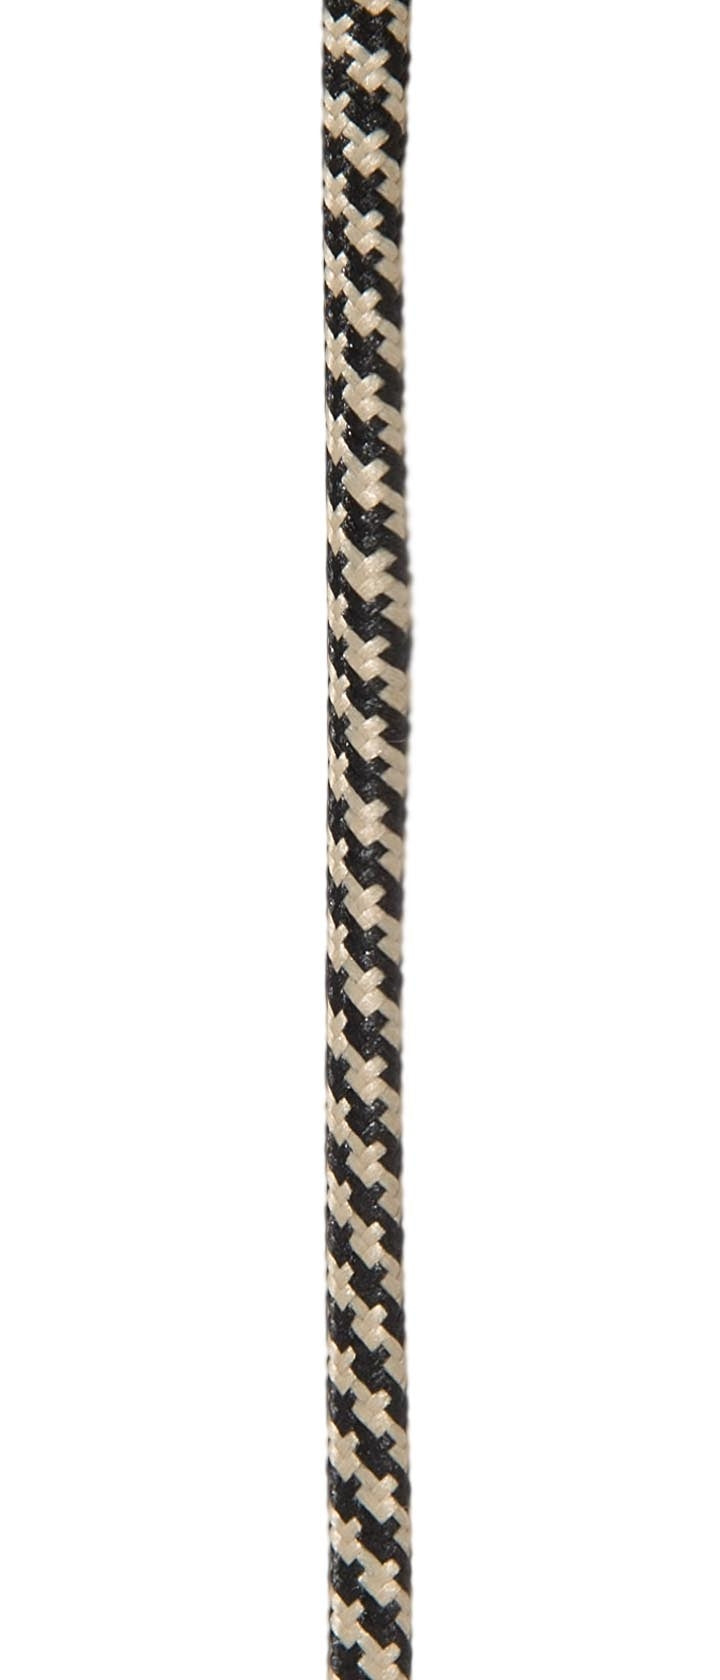 Black & Tan Hounds-tooth Pattern 18 Gauge SPT-2 Fabric Parallel Lamp Cord, Choice of Length 